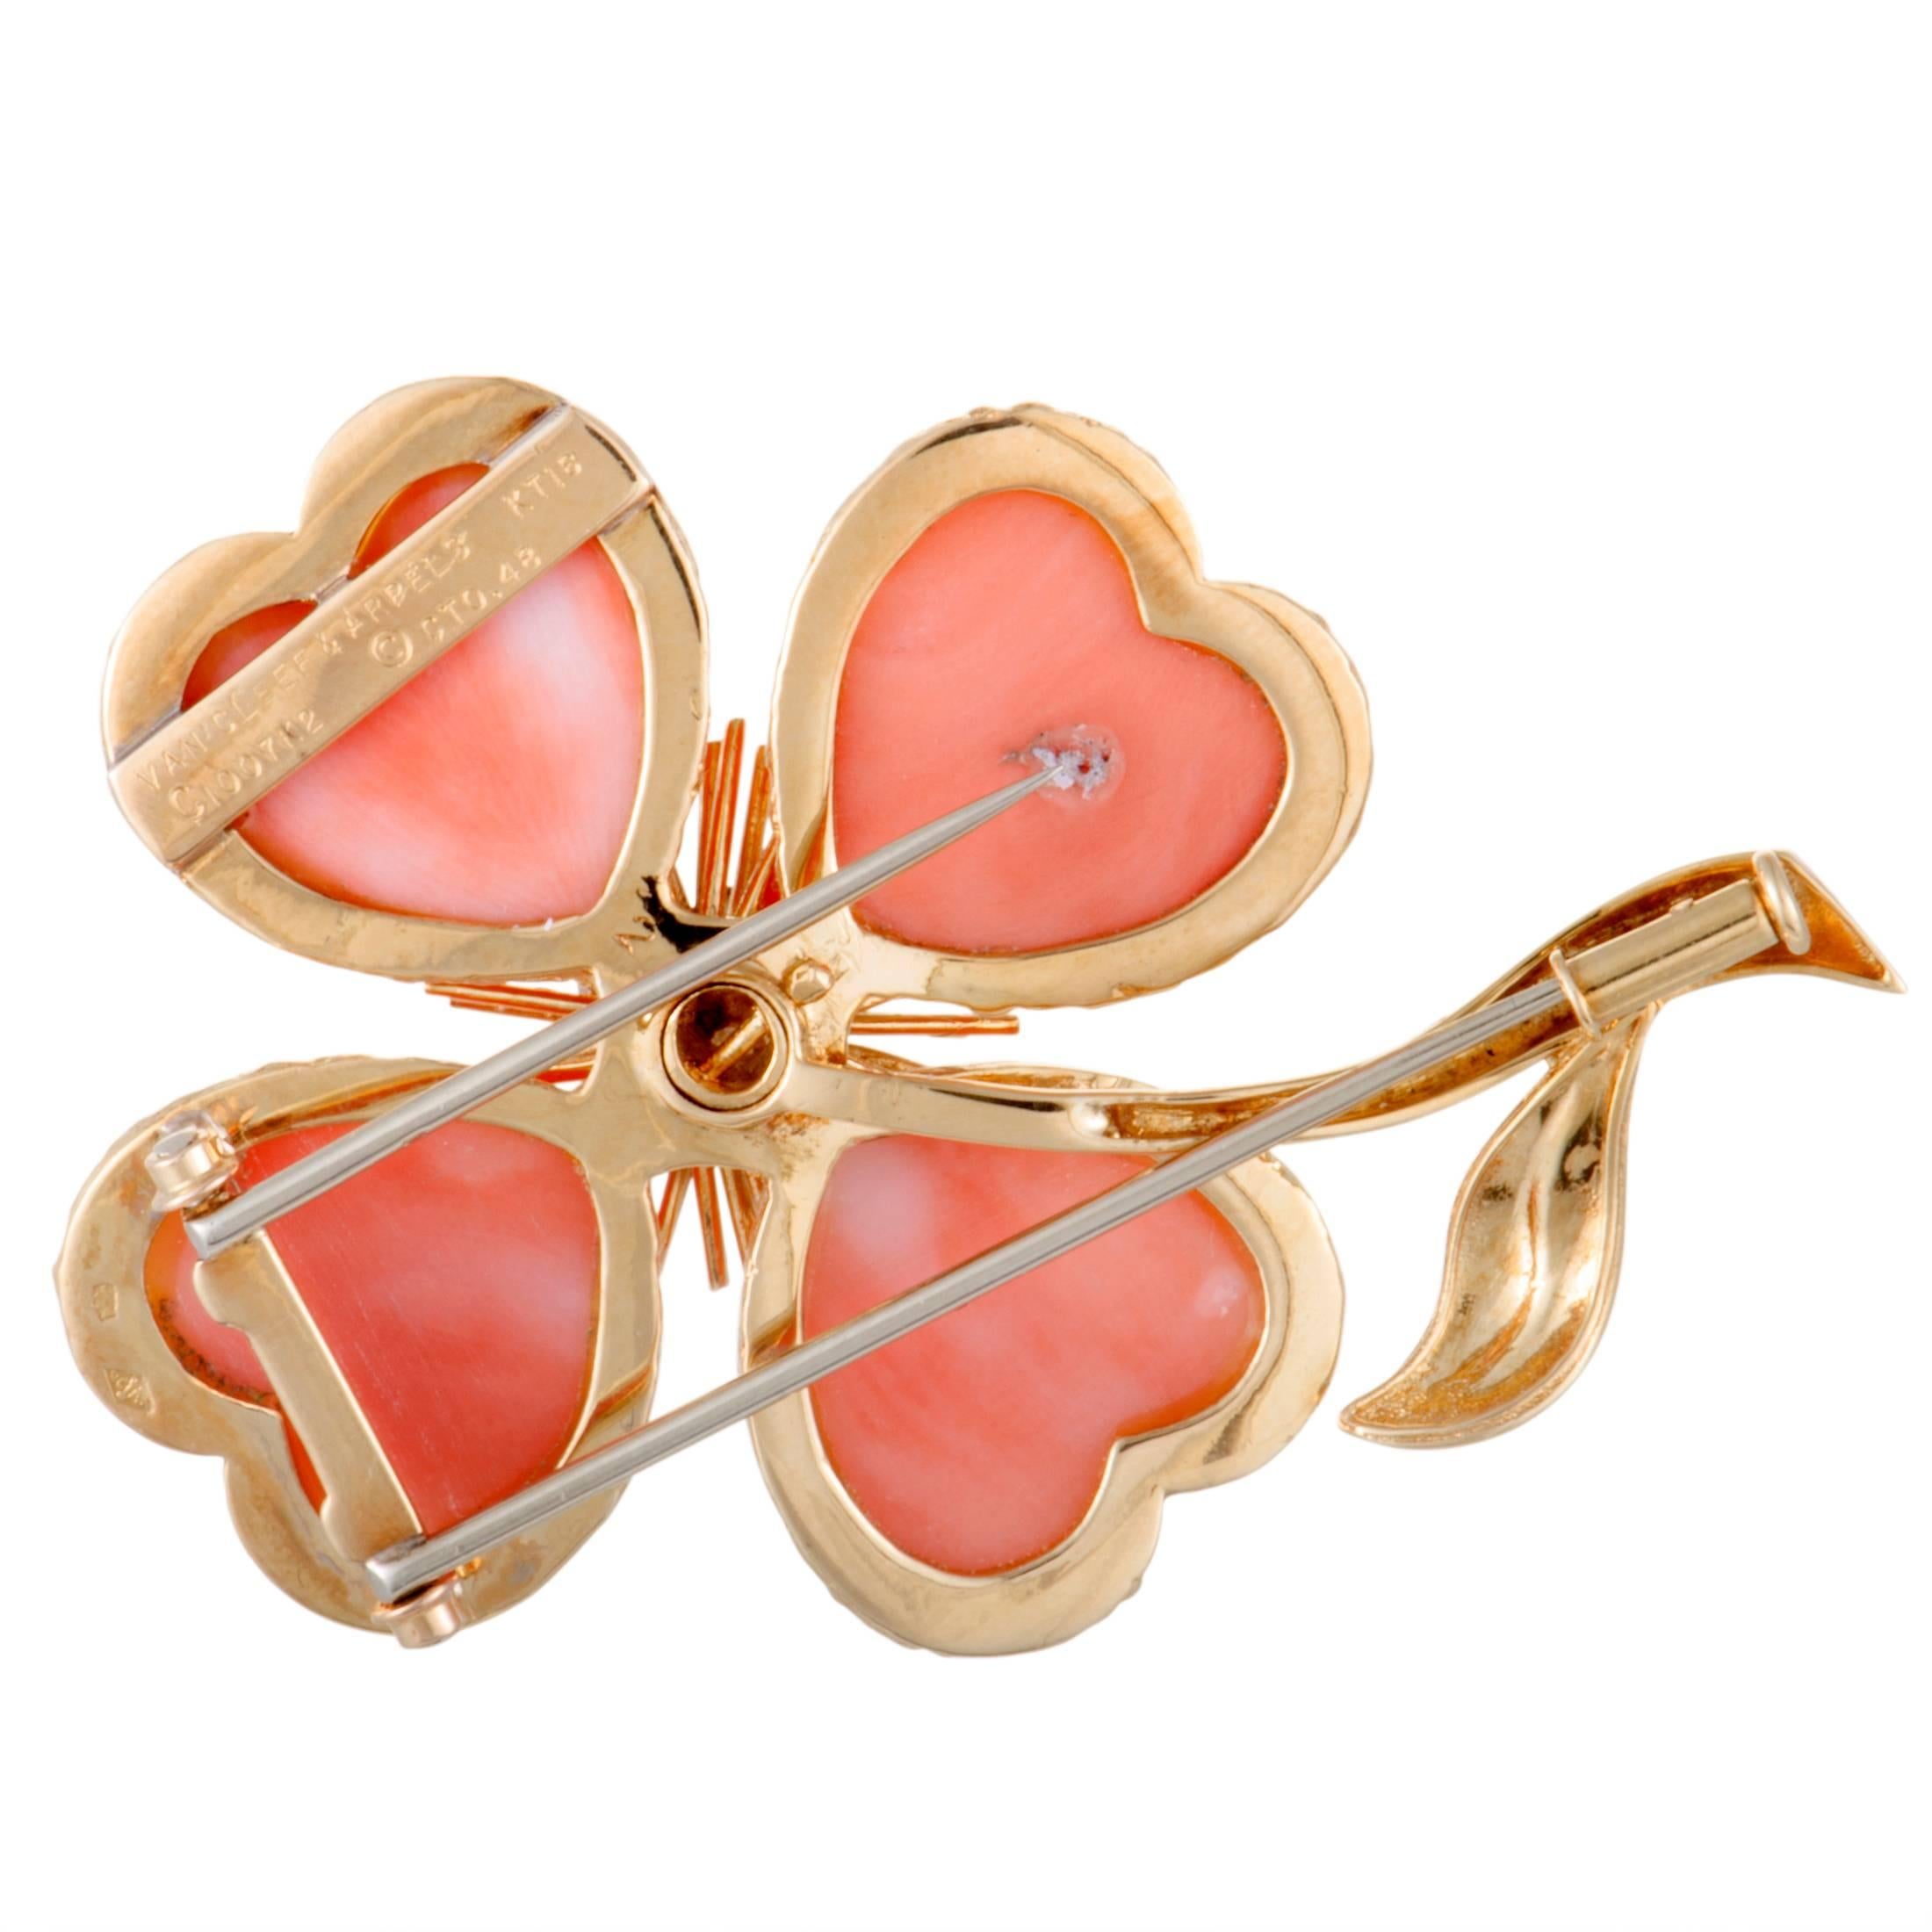 Created for the incredibly charming “Rose de Noël” collection by Van Cleef & Arpels, this gorgeous brooch offers a delightfully feminine appearance. The brooch is expertly crafted from luxurious 18K yellow gold and beautifully decorated with corals